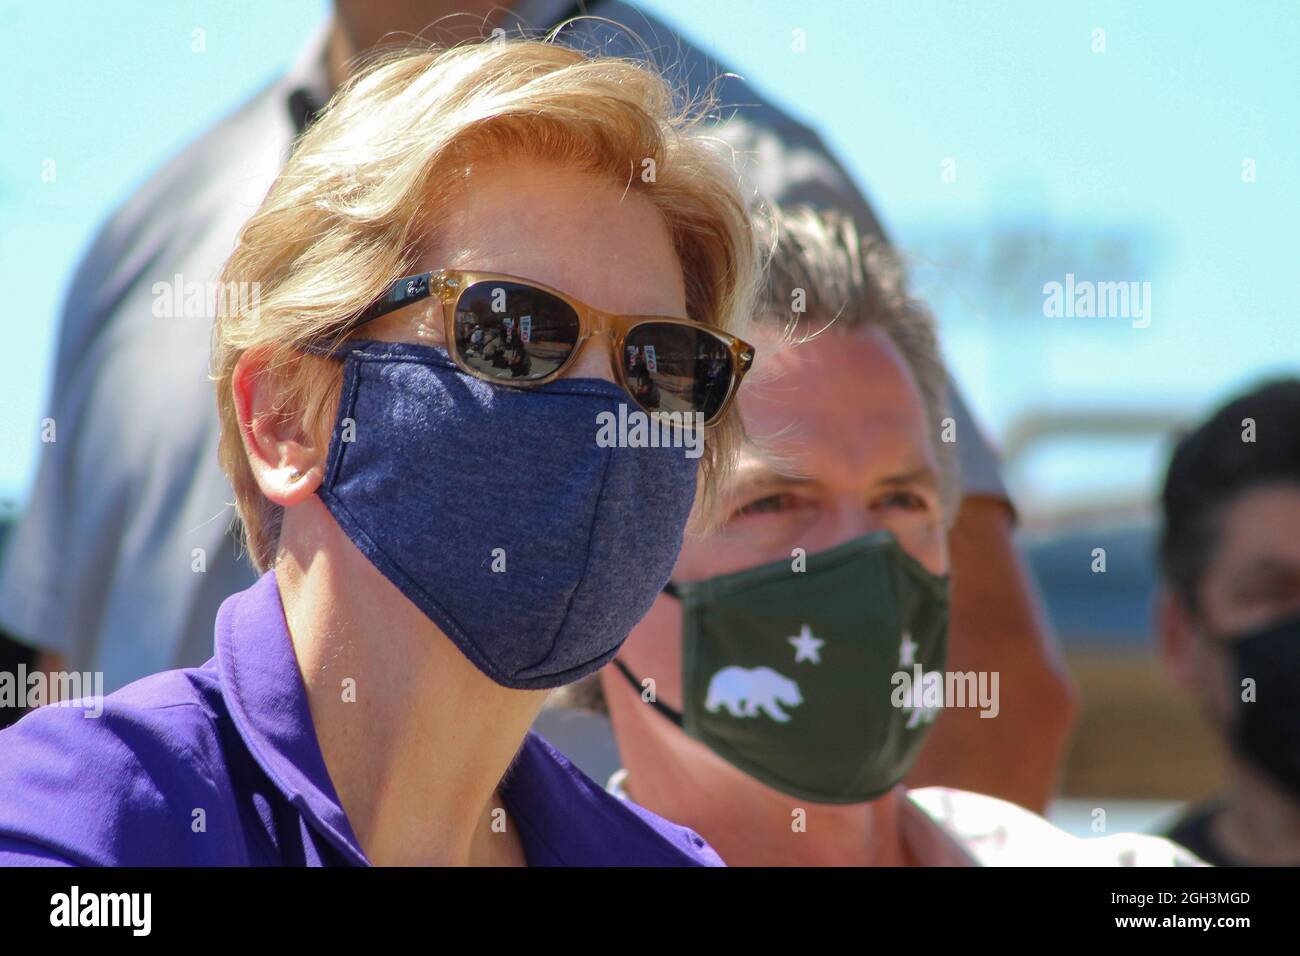 Los Angeles, USA. 04th Sep, 2021. Senator Elizabeth Warren at a 'Vote No' rally in Los Angeles, California on September 4, 2021. (Photo by Conor Duffy/Sipa USA) Credit: Sipa USA/Alamy Live News Stock Photo